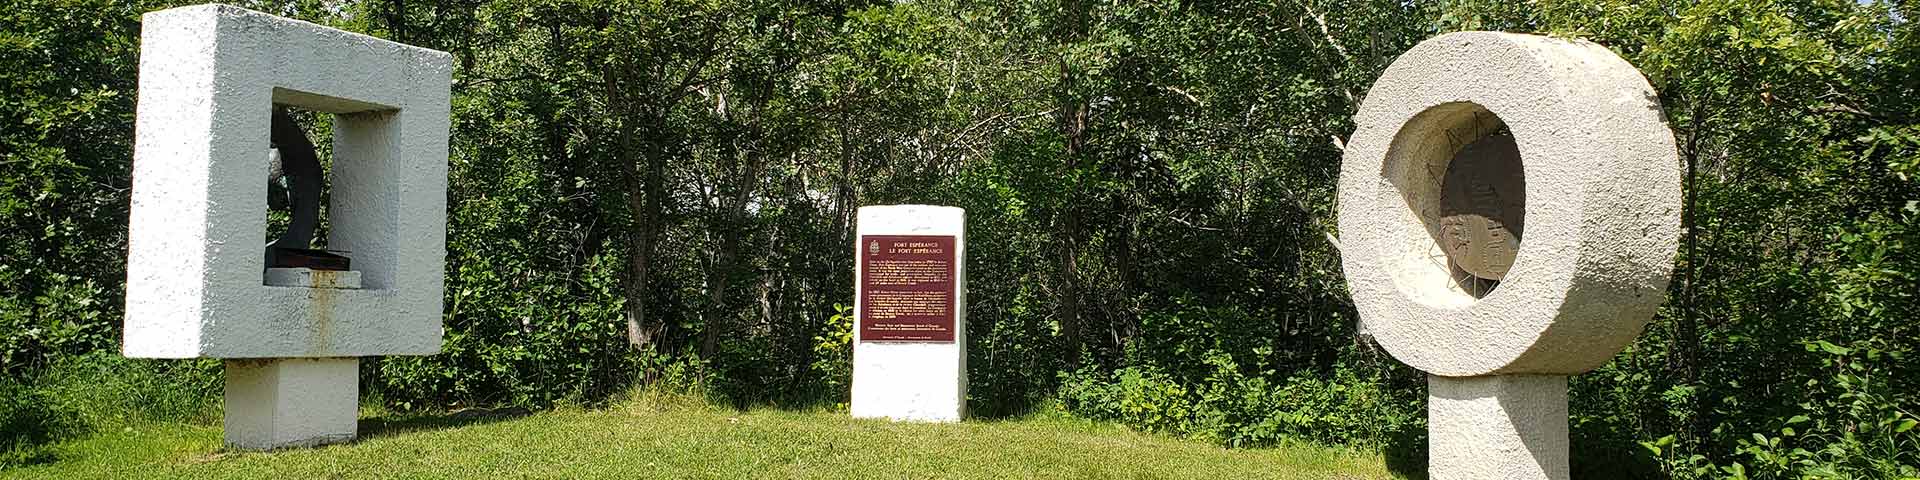 View of the sculptures and the Historic Sites and Monuments Board plaque at Fort Espérance